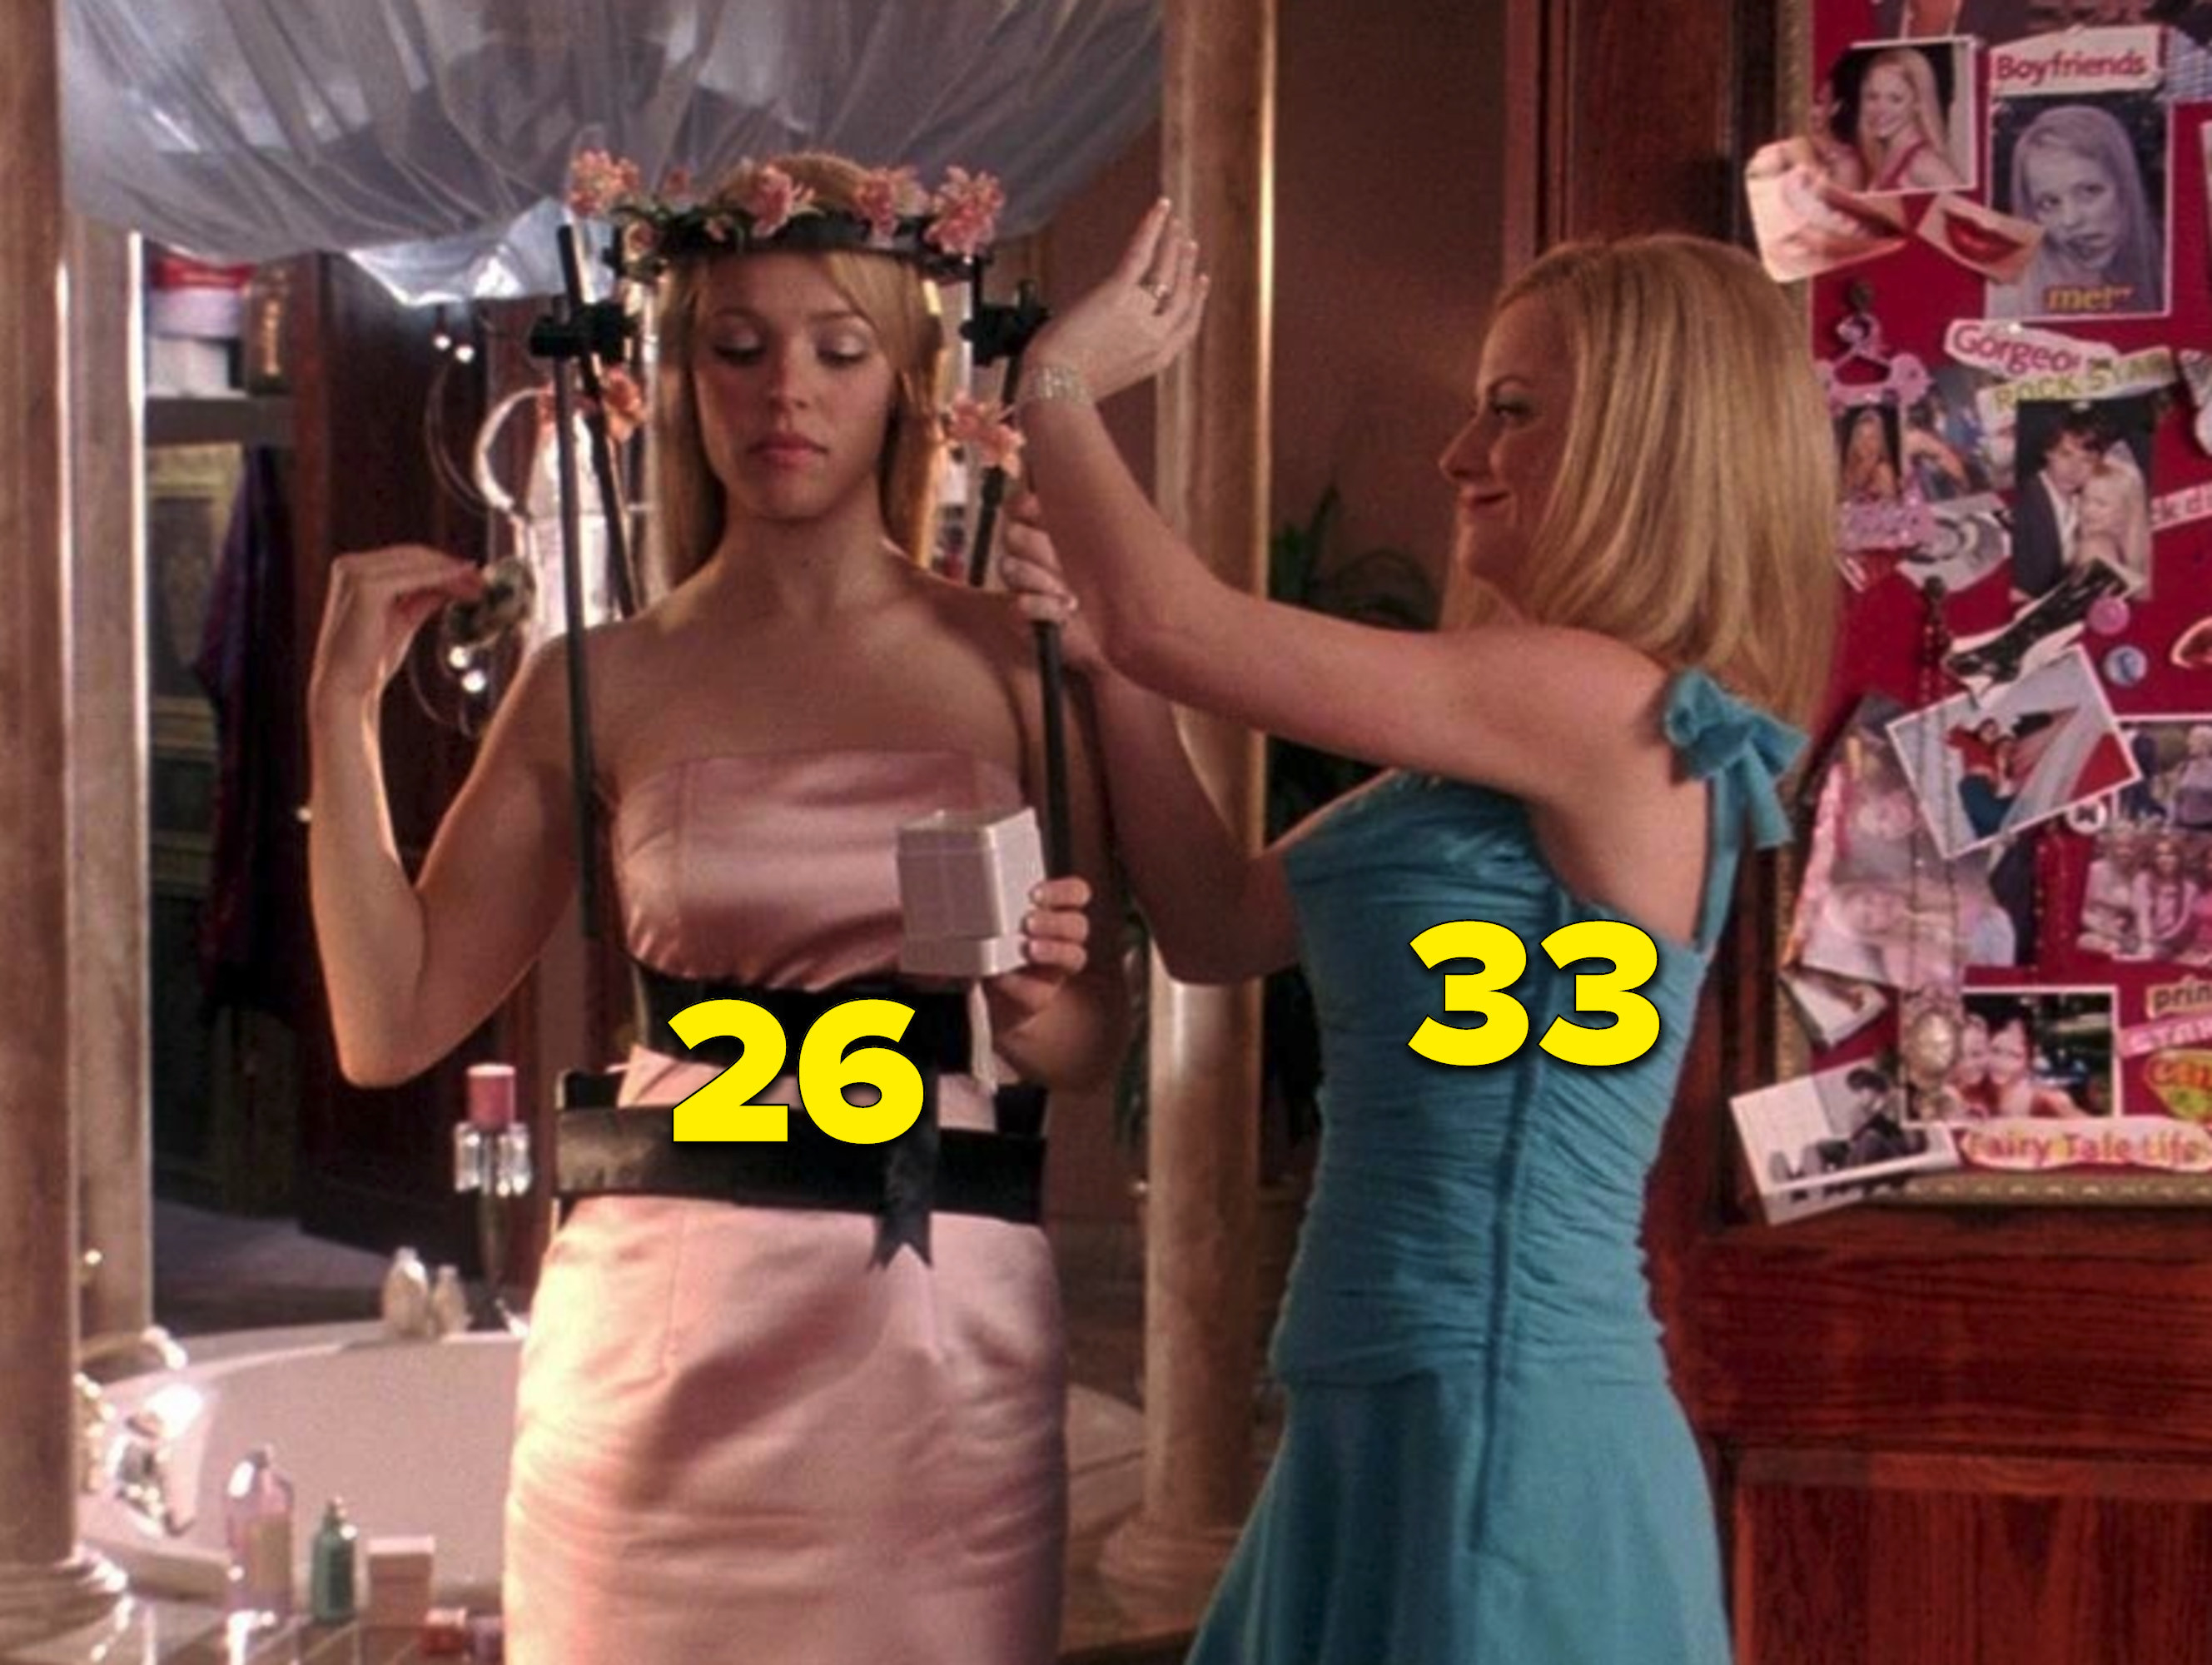 Rachel McAdams at 26 and Amy Poehler at 33